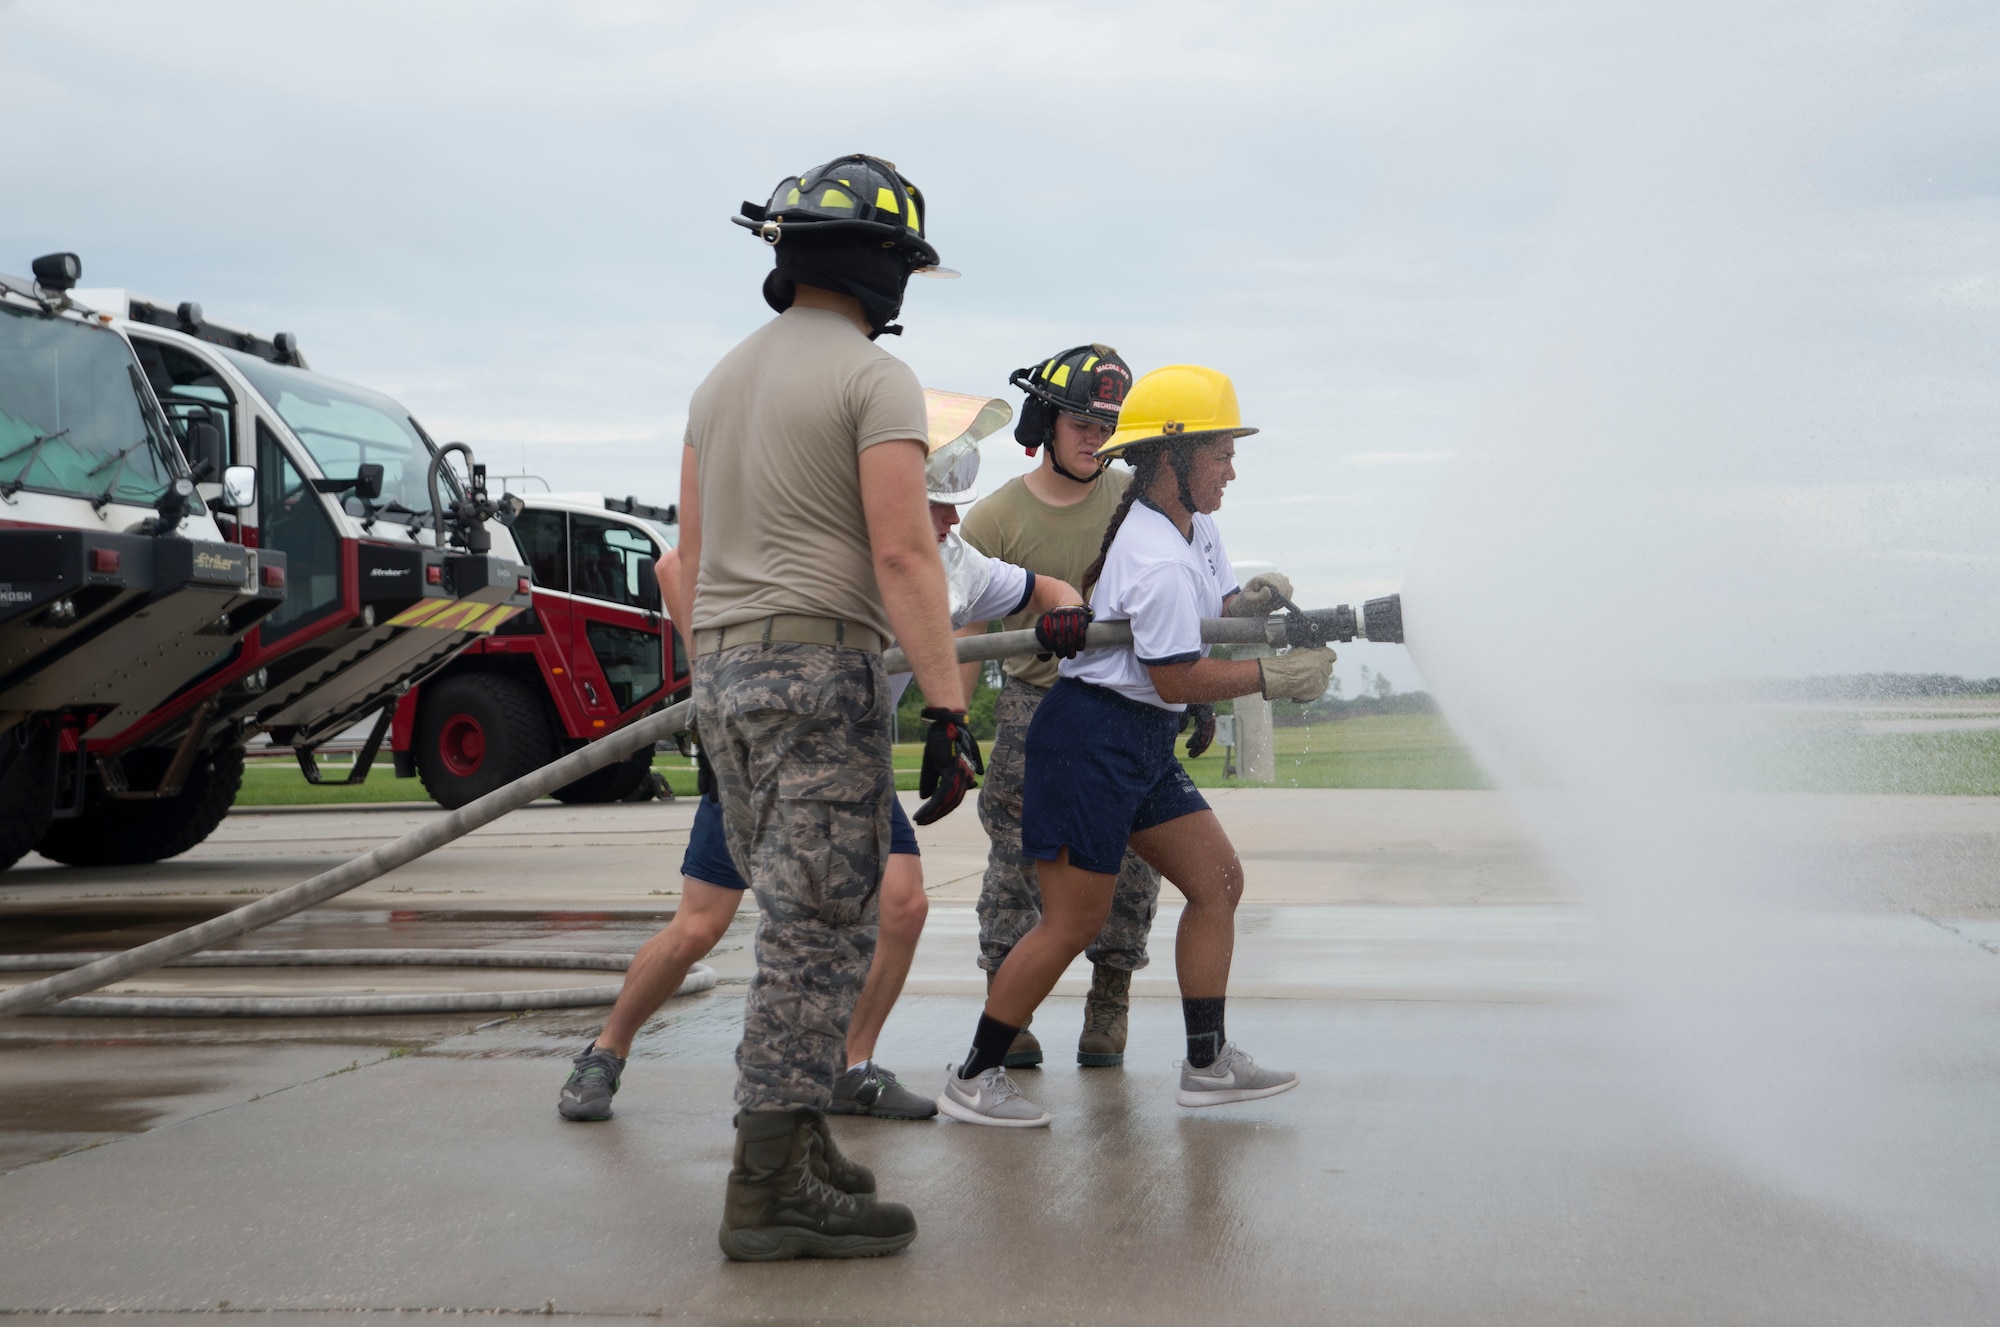 U.S. Air Force Fire Protection Airmen with the 6th Civil Engineer Squadron assist cadets in operating a fire hose at the Crash Fire Station on MacDill Air Force Base, Fla., July 6, 2018.